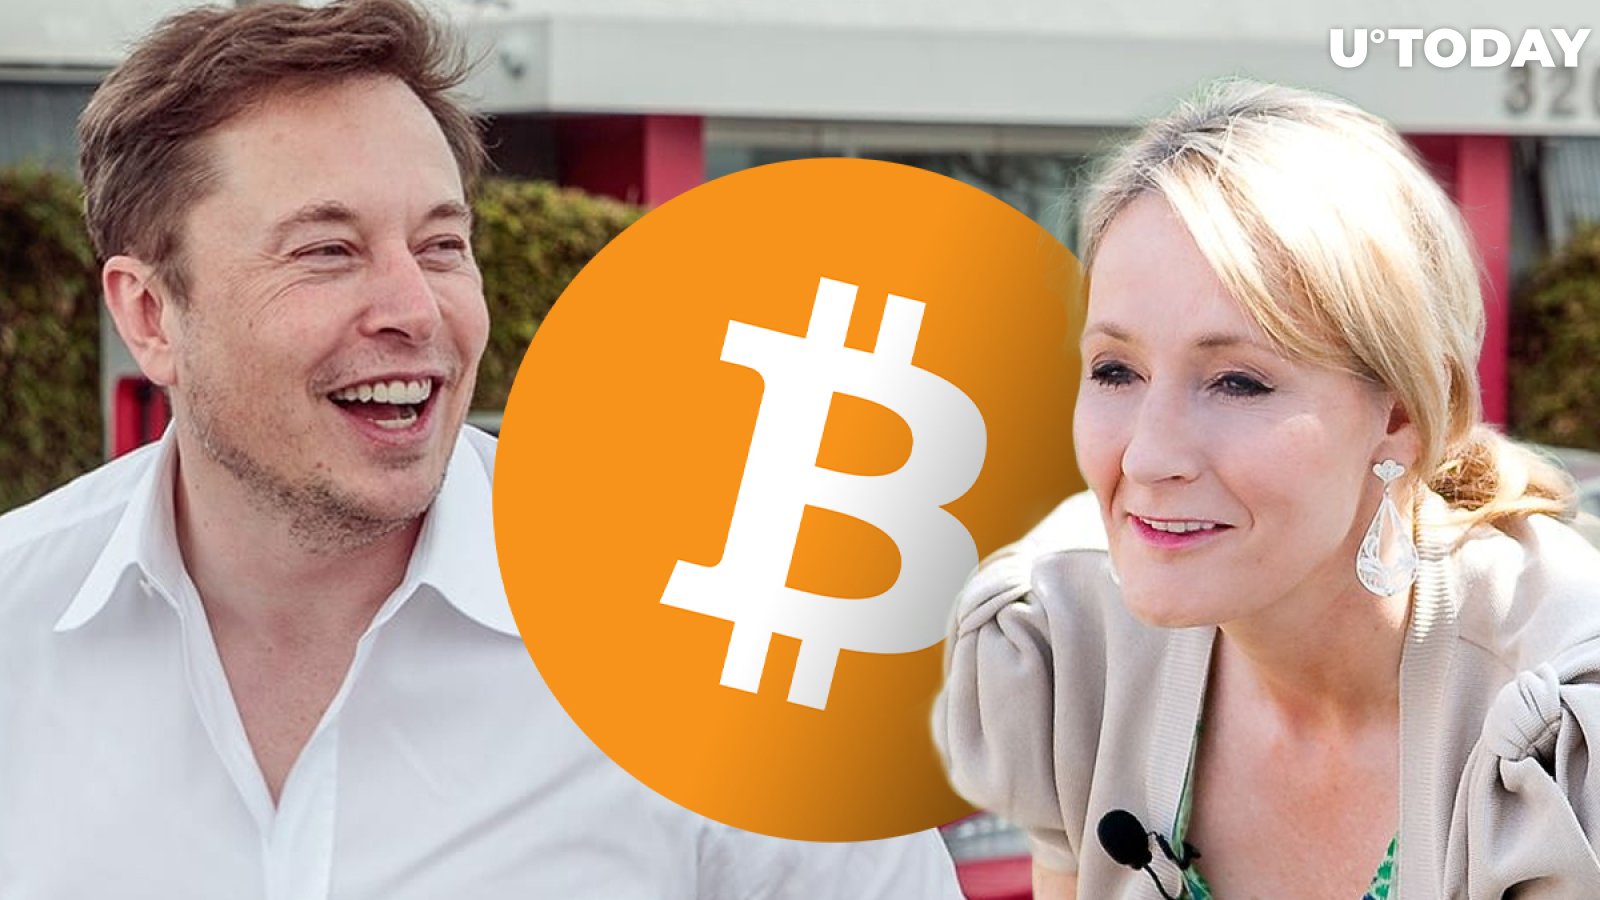 Celebrities Mentioning Bitcoin Get Crypto Twitter Excited – From J.K. Rowling to Tesla CEO and Bill Gates